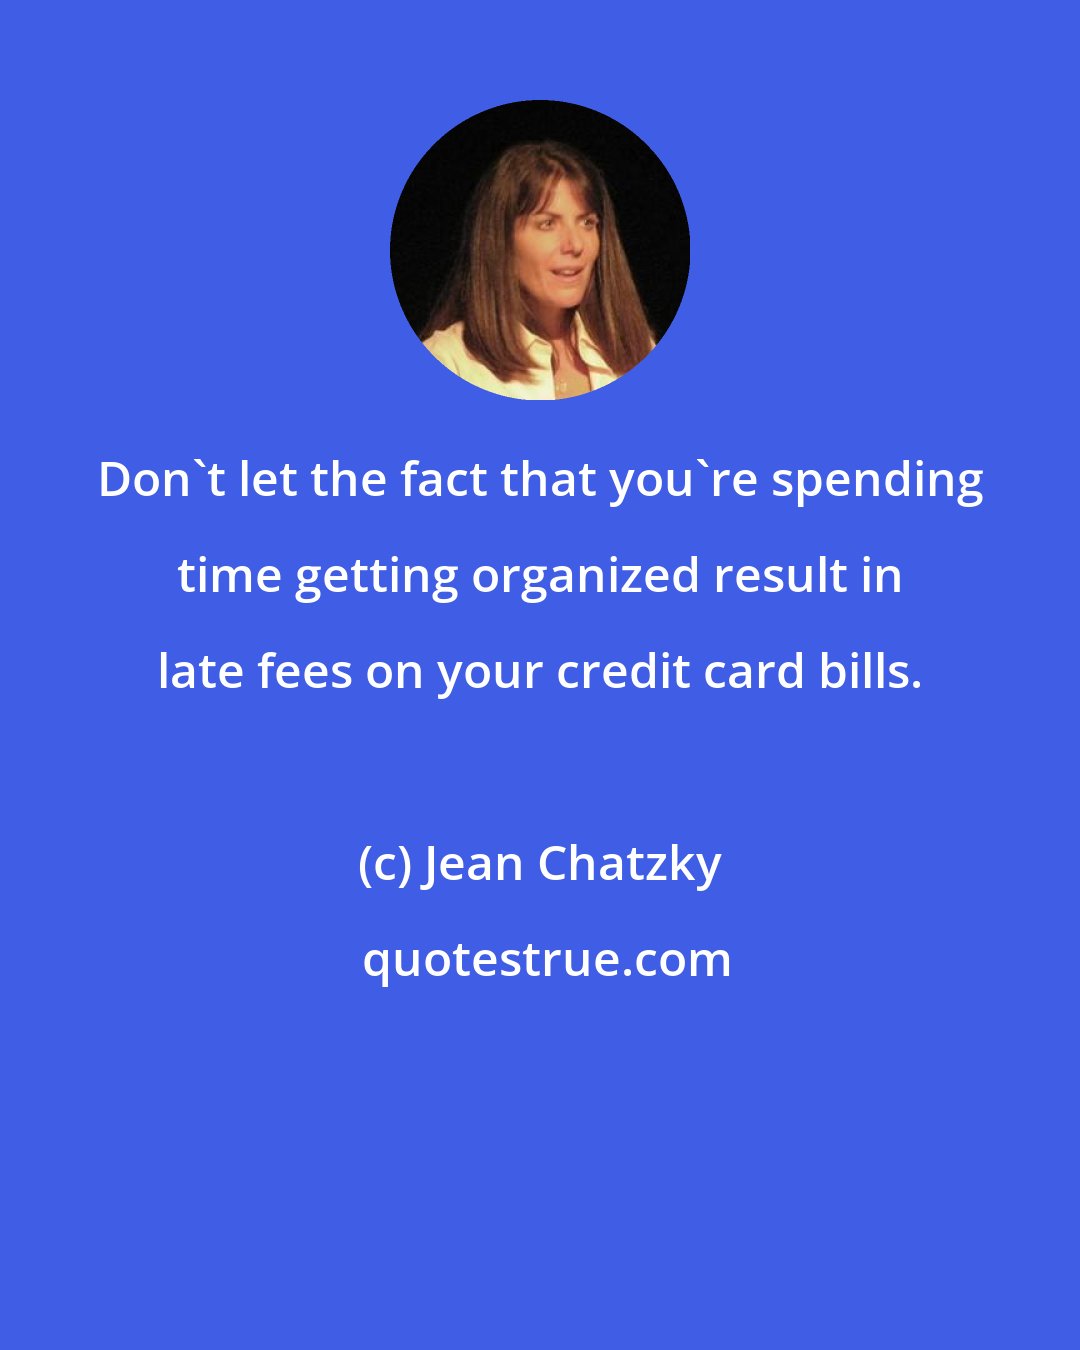 Jean Chatzky: Don't let the fact that you're spending time getting organized result in late fees on your credit card bills.